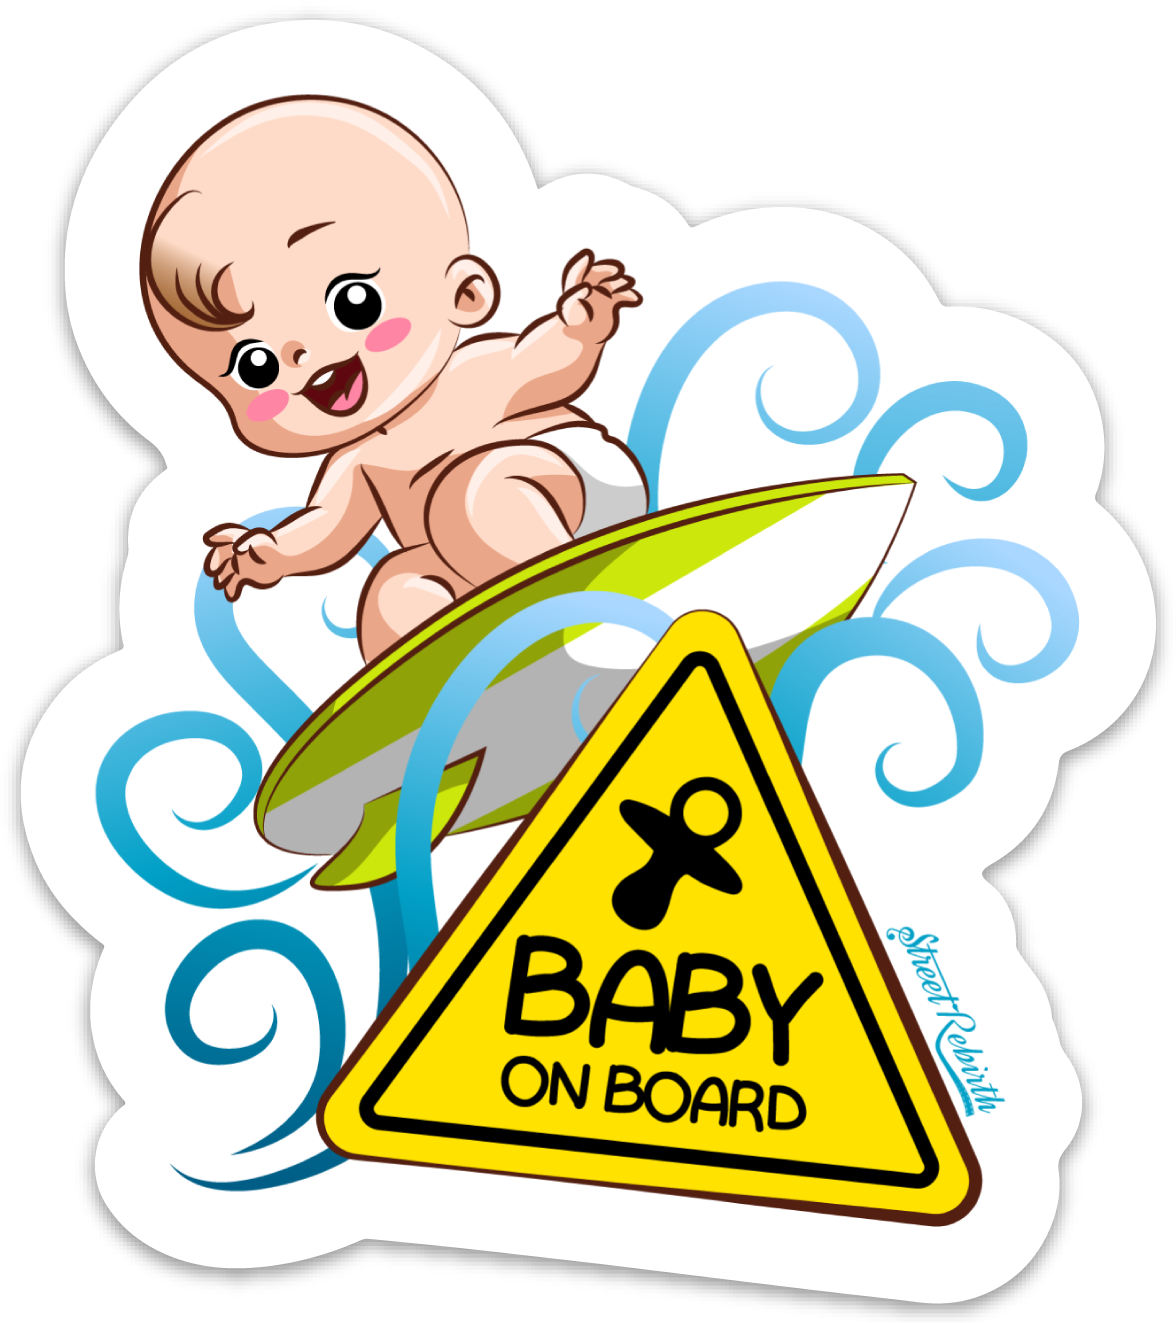 BABY ON BOARD PUN STICKER – ONE 4 INCH WATER PROOF VINYL STICKER – FOR HYDRO FLASK, SKATEBOARD, LAPTOP, PLANNER, CAR, COLLECTING, GIFTING